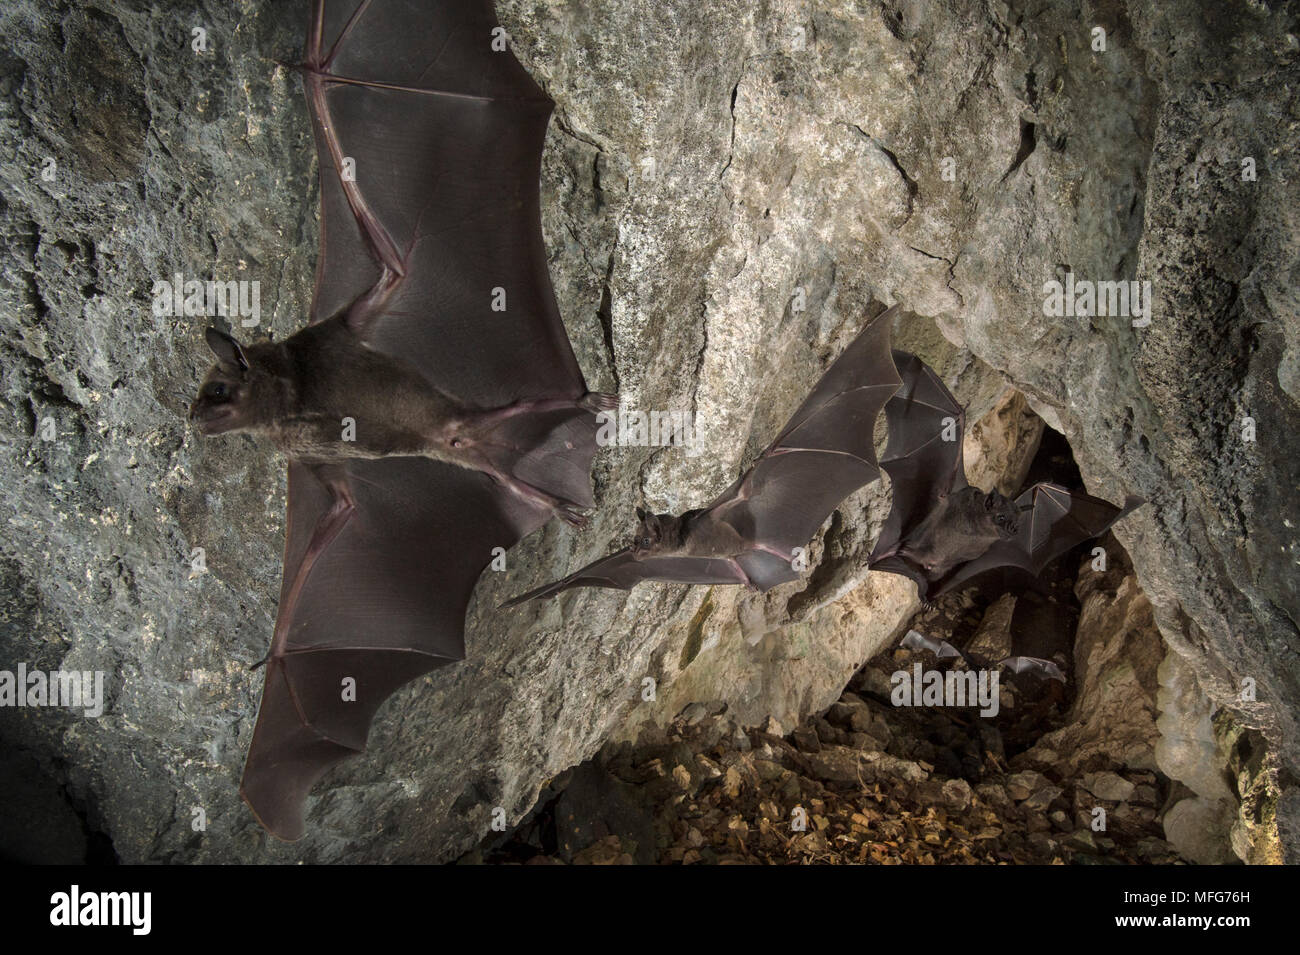 Greater spear-nosed bats, Phyllostomus hastatus, three shot composite leaving a cave in Costa Rica Stock Photo